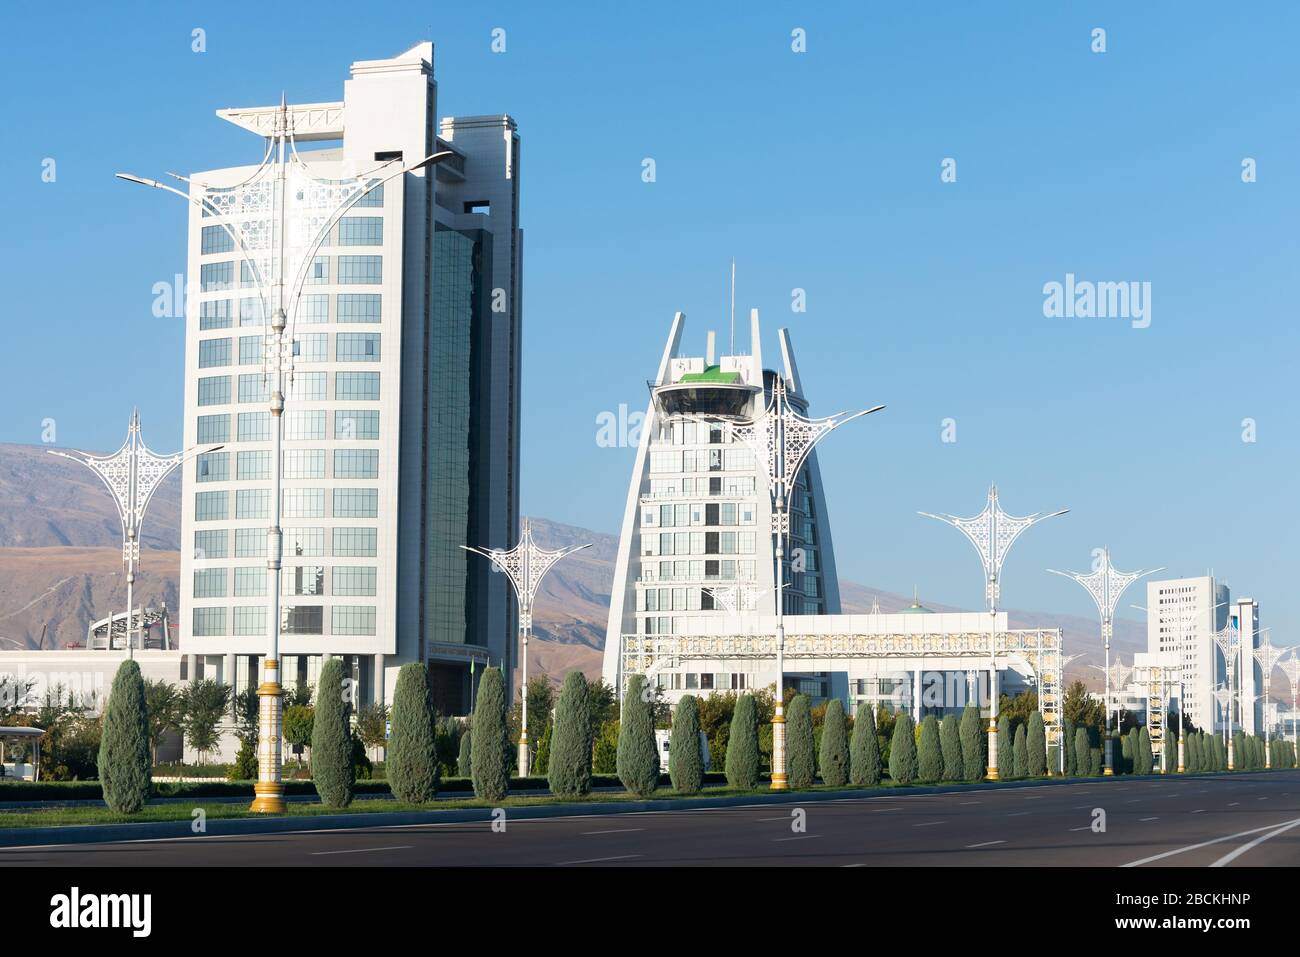 Ministries buildings at Archabil Highway in Ashgabat, Turkmenistan, Government white marble constructions with vegetation and empty avenue. Stock Photo